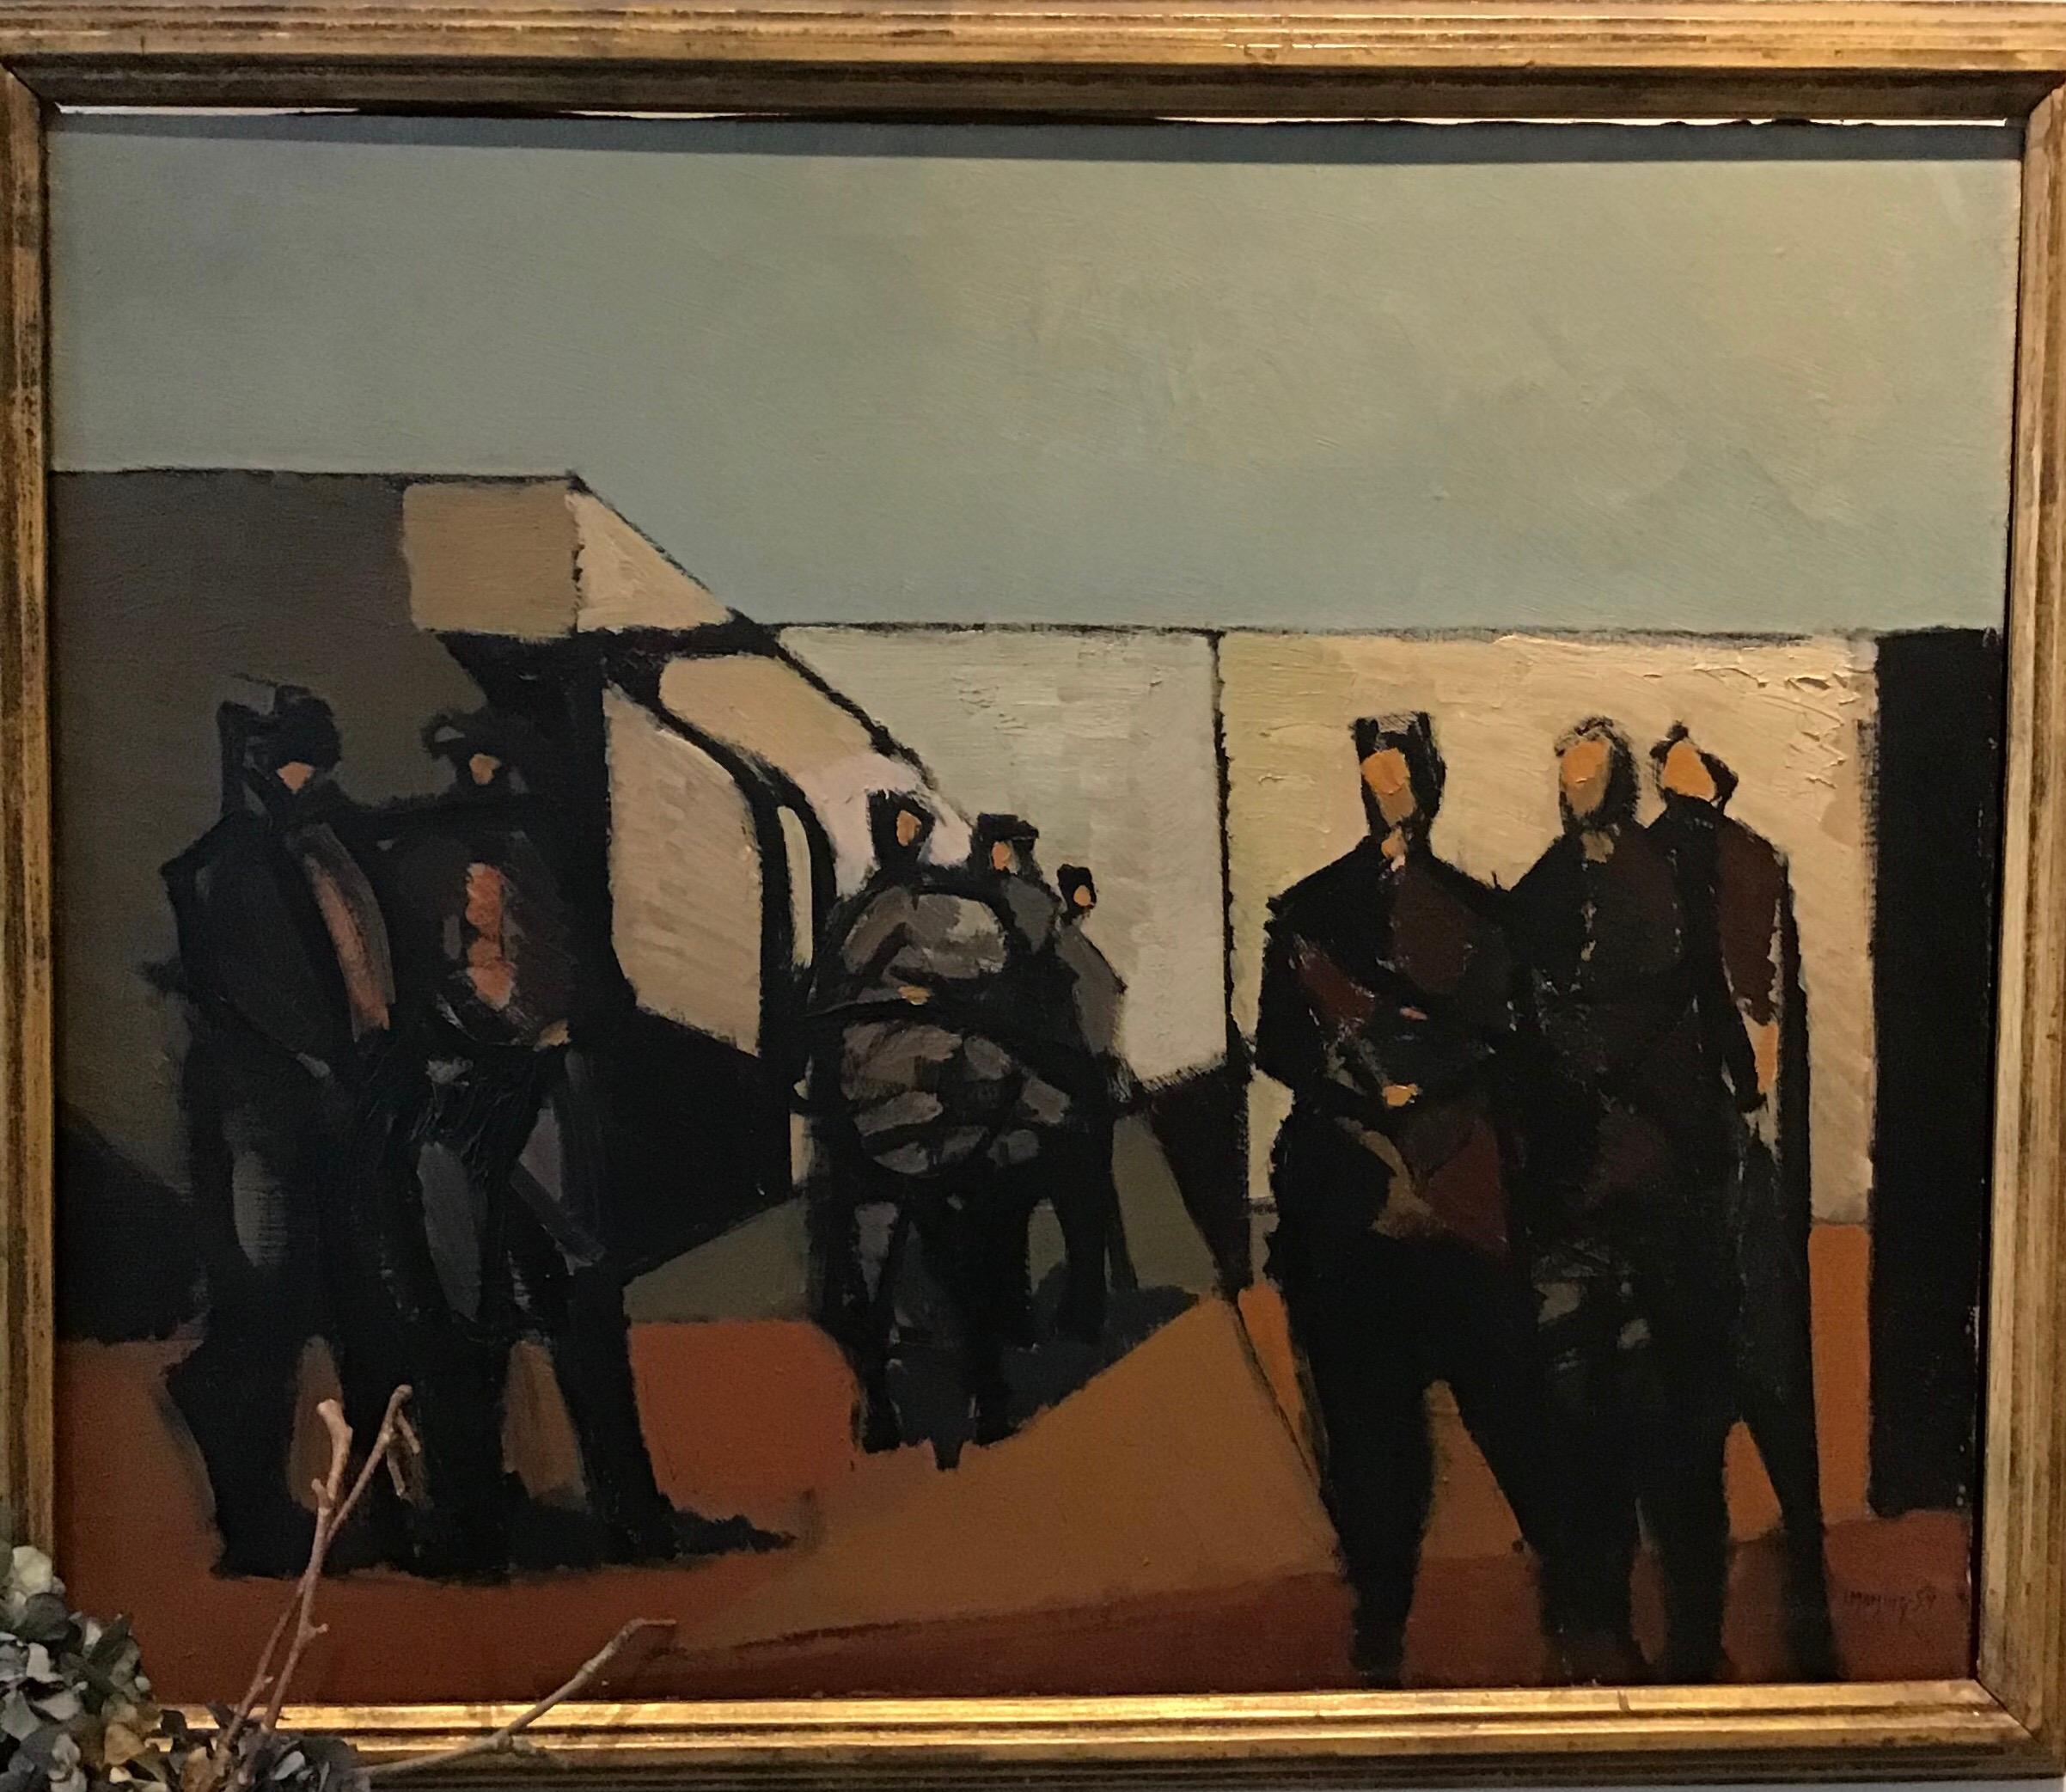 A framed oil painting dated 1954 by Scandinavian artist Ivar Morsing.

Morsing was born in Angelholm Sweden in 1919 and after serving in WW2, he became well traveled spending time in France and across Europe. In his later years he spent time in